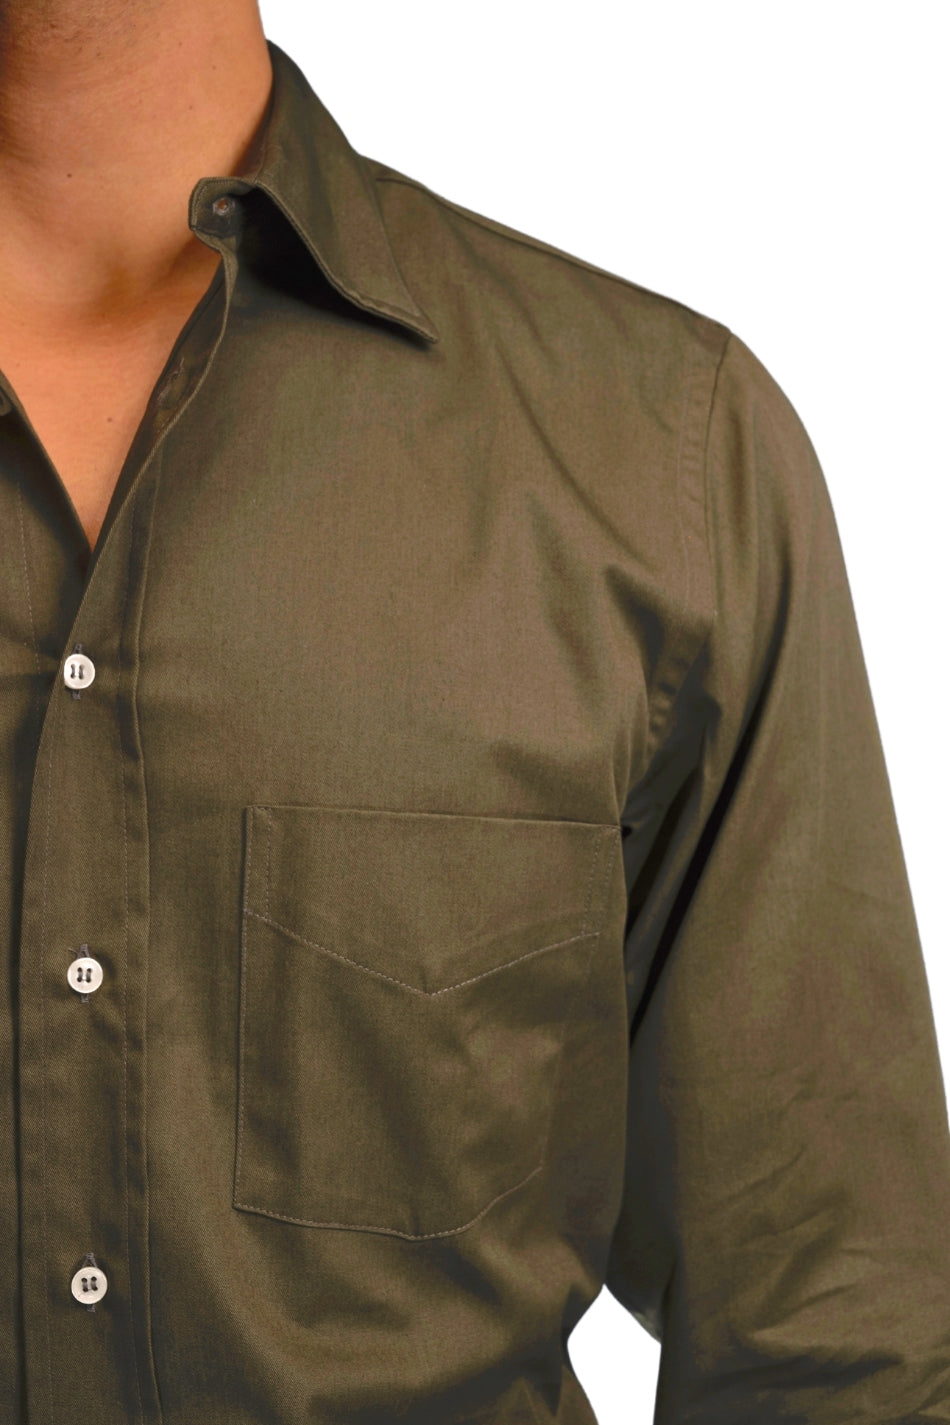 "DAMBO" - CASUAL SHIRT COLLEGE STYLE IN COTTON TWILL